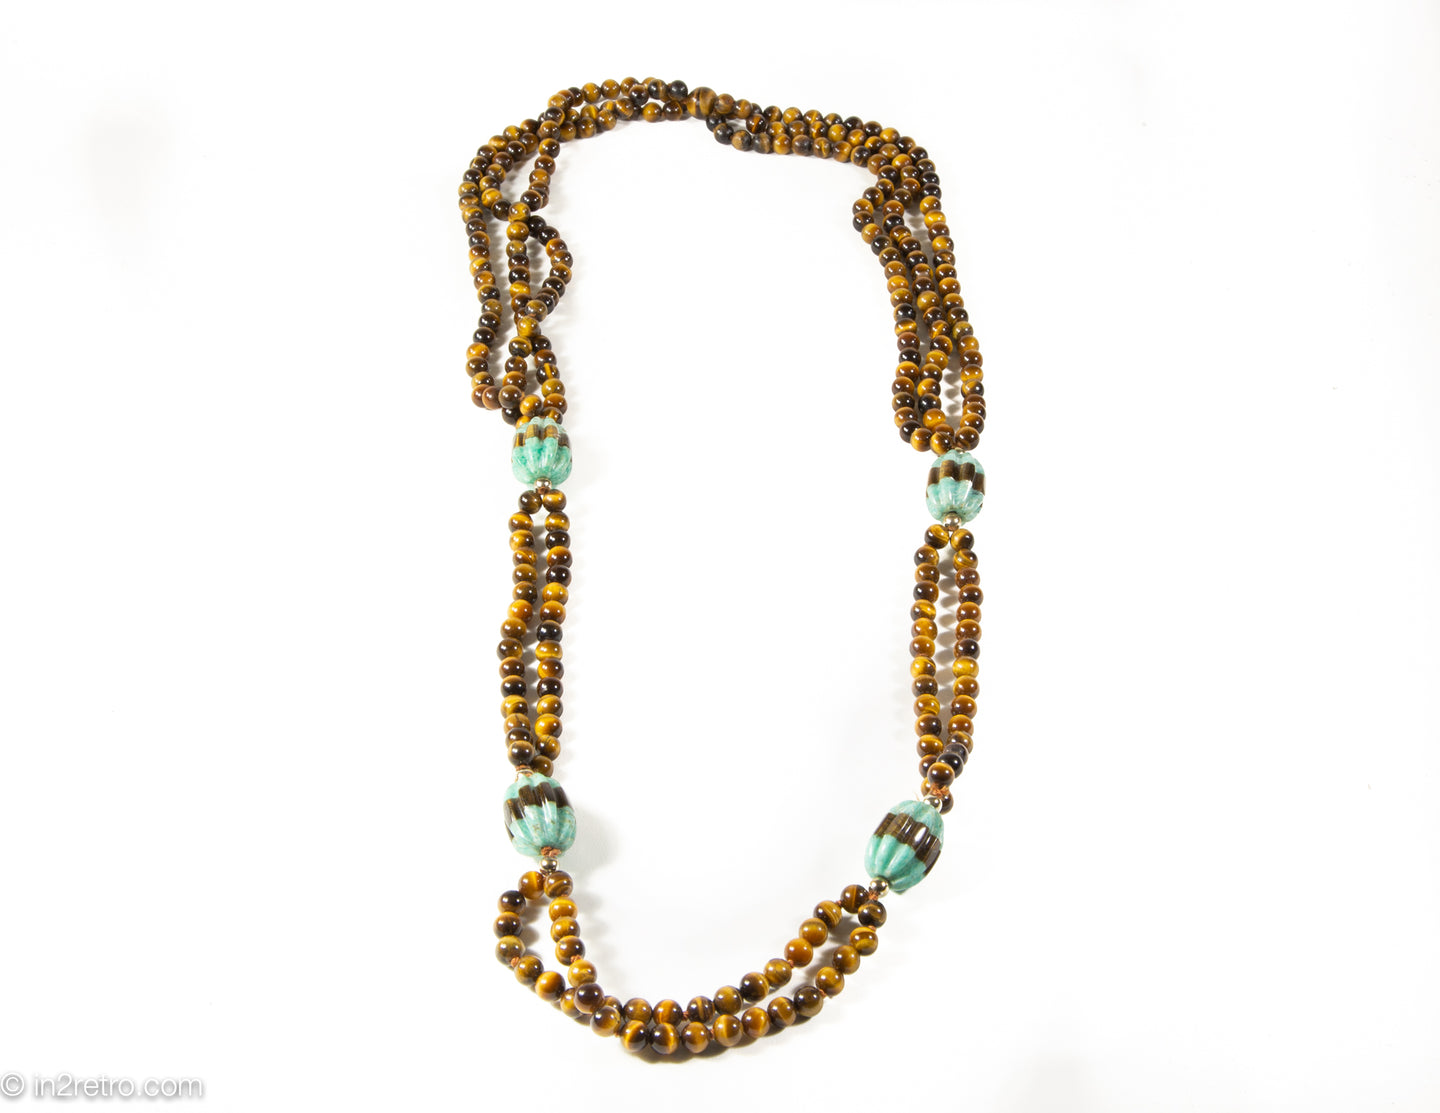 VINTAGE GENUINE TIGER'S EYE MULTI-STRAND BEADS AND CARVED TURQUOISE STATIONS LONG NECKLACE